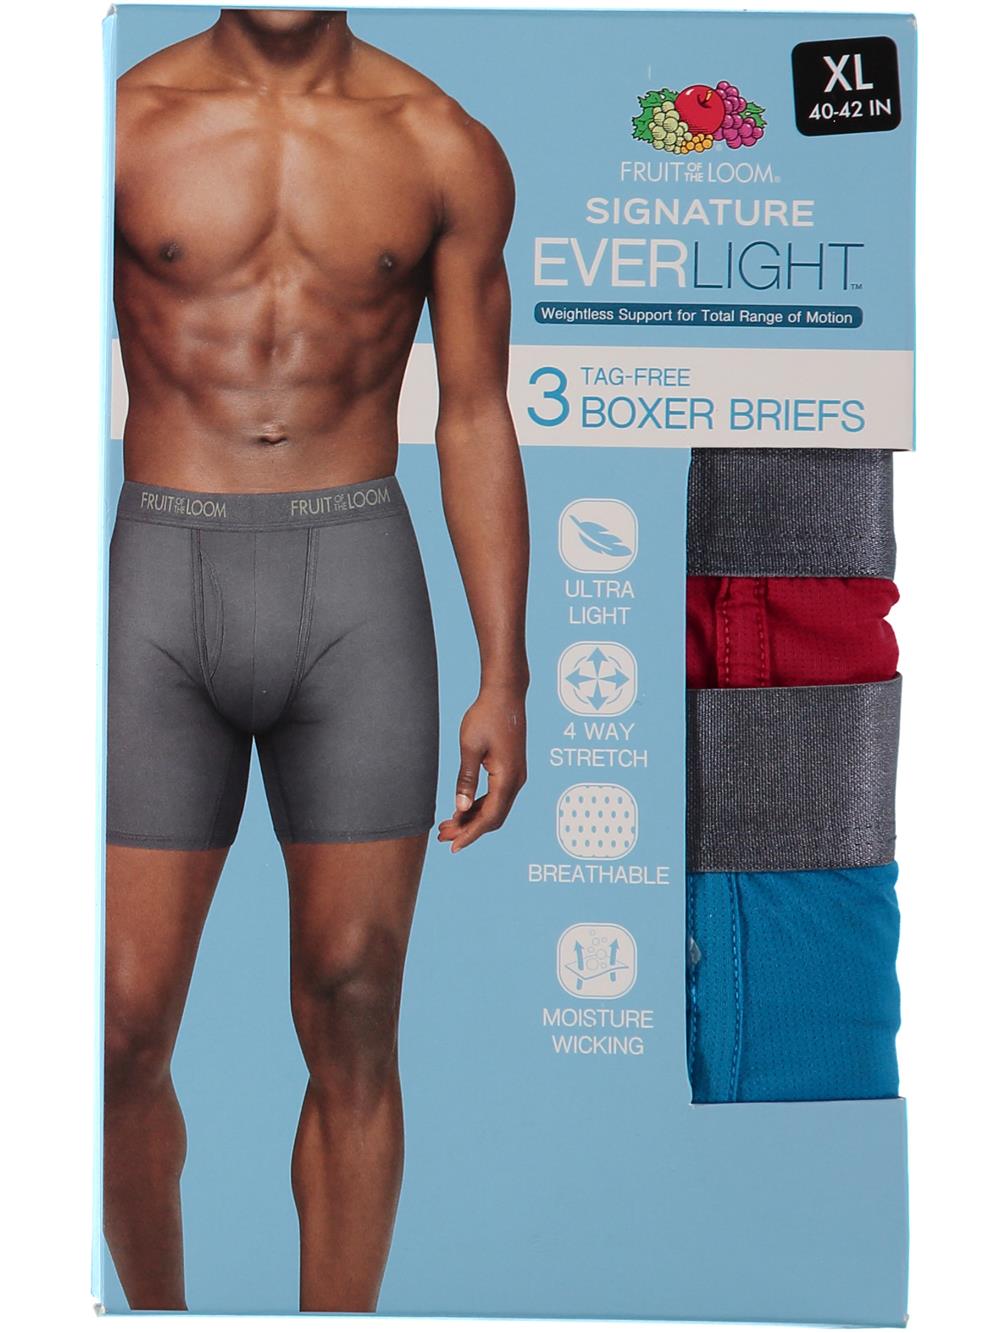 Fruit of the Loom Men's Breathable Cotton Micro-Mesh Boxer Brief, 3-pack,  Size S-XL 